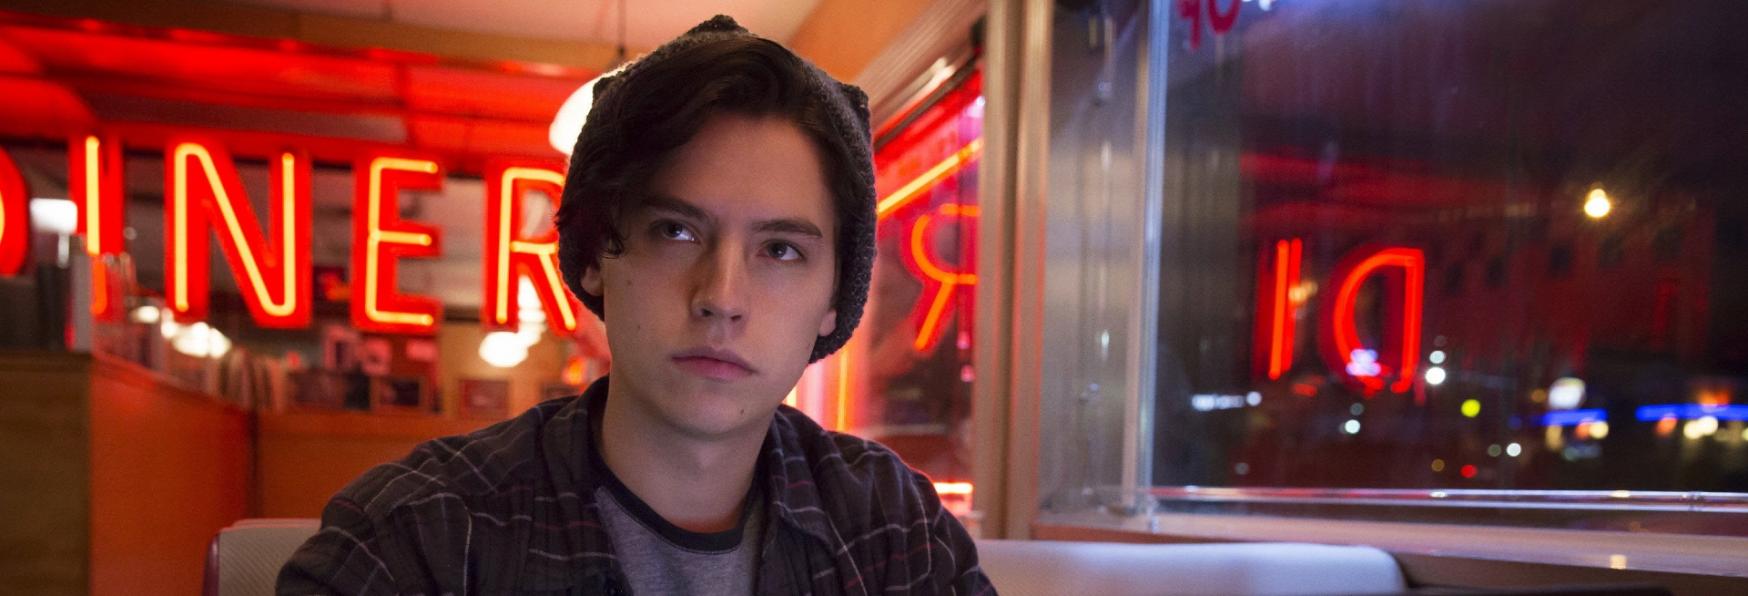 Riverdale 7: The CW releases the Official Trailer of the Final Season